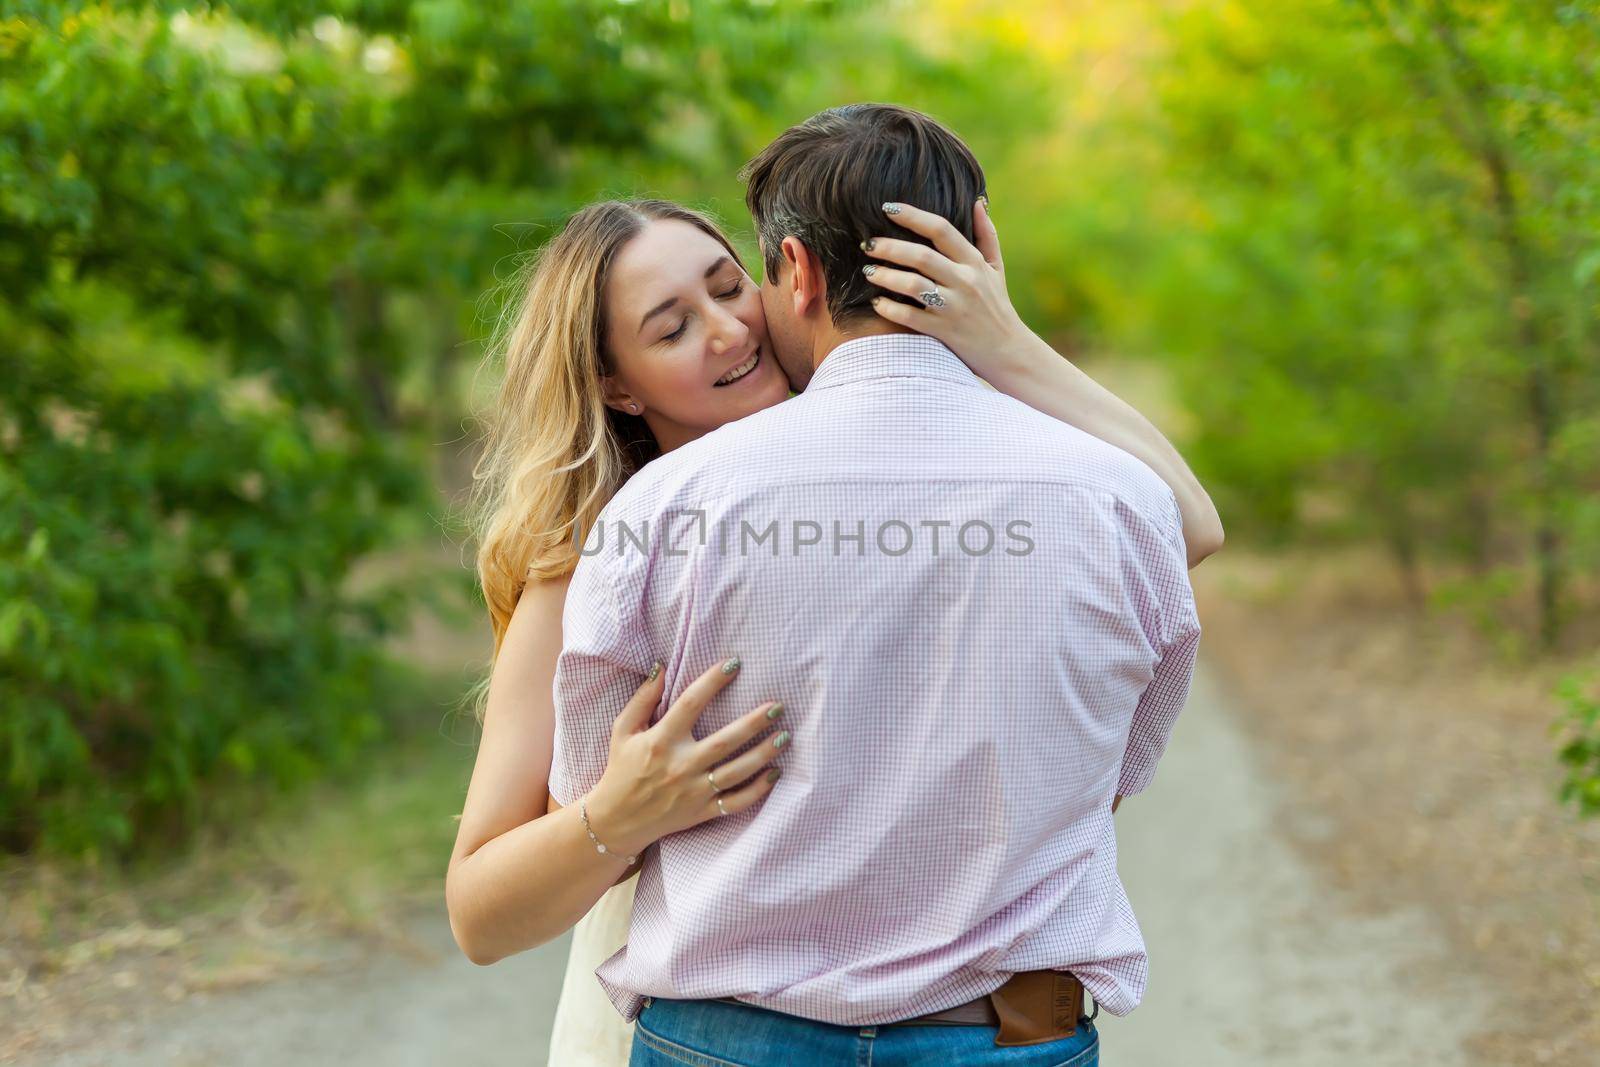 Adult couple in love outdoor. Stunning sensual outdoor portrait of young hugging couple posing in summer in field